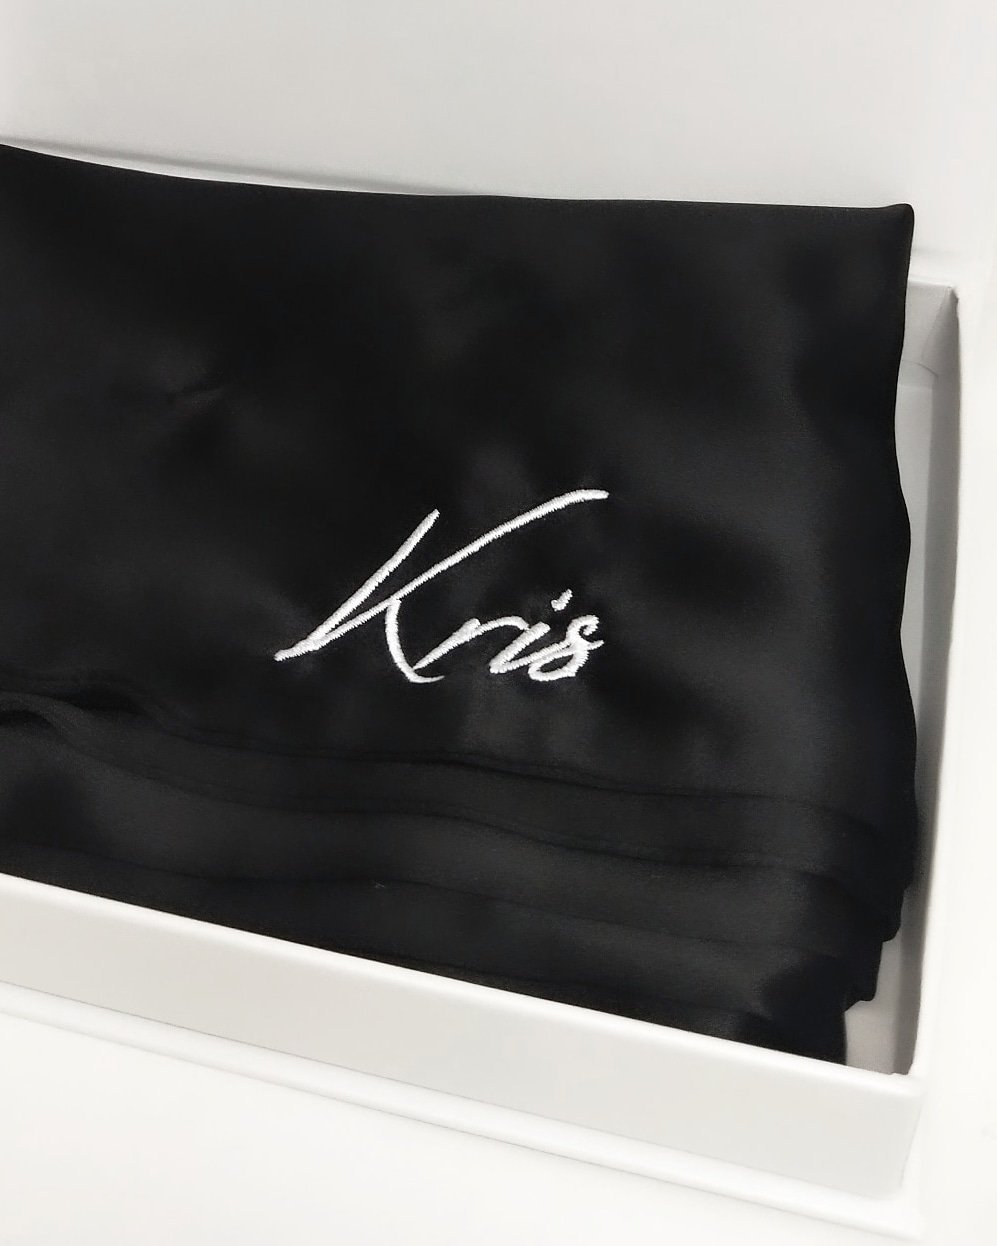 BLACK Personalised Silk Pillowcase - Queen Size